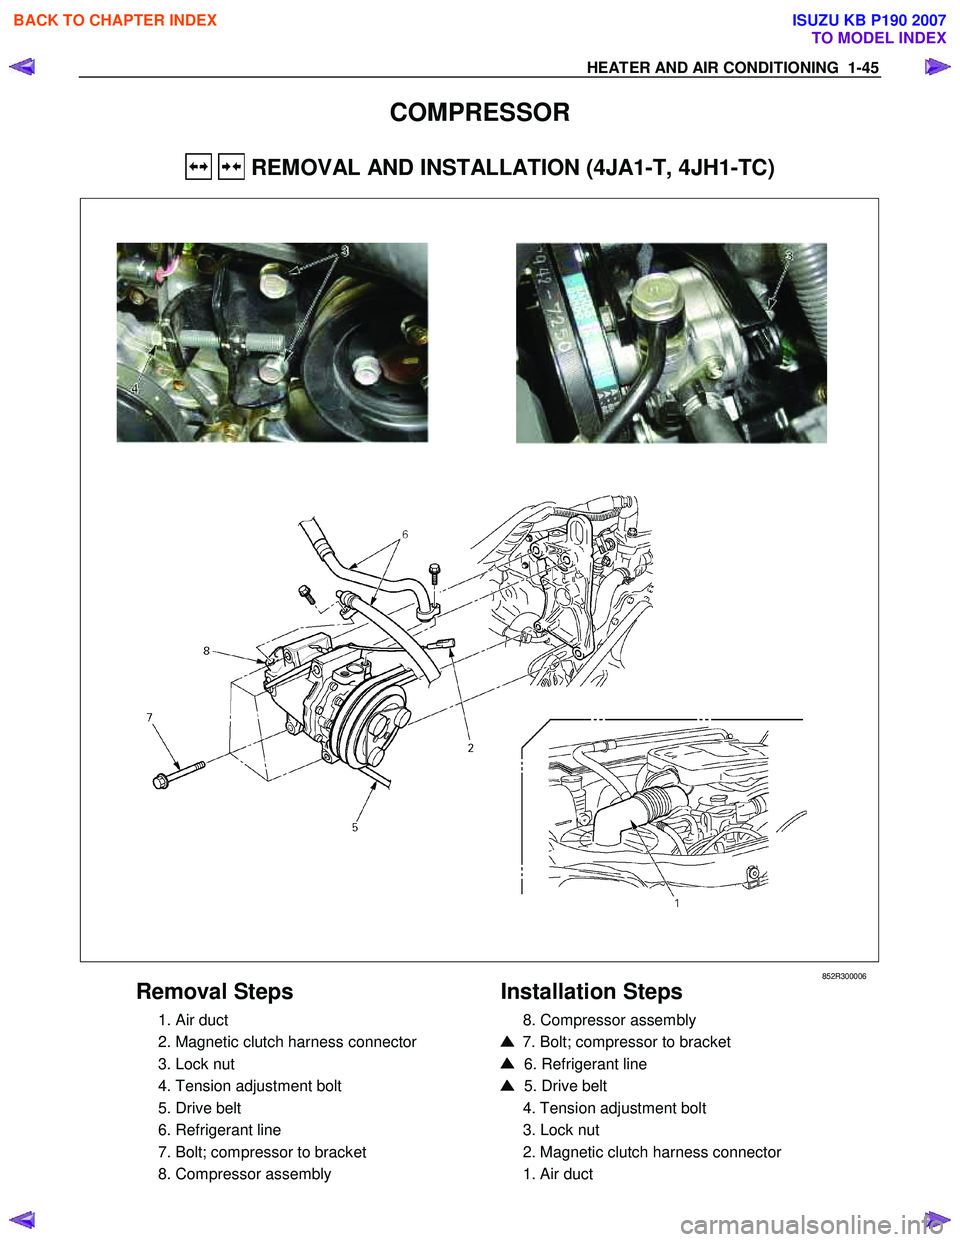 ISUZU KB P190 2007  Workshop Service Manual HEATER AND AIR CONDITIONING  1-45 
COMPRESSOR 
  REMOVAL AND INSTALLATION (4JA1-T, 4JH1-TC) 
   
 
  
 
 
 
852R300006 
Removal Steps 
  1. Air duct 
  2. Magnetic clutch harness connector 
  3. Lock 